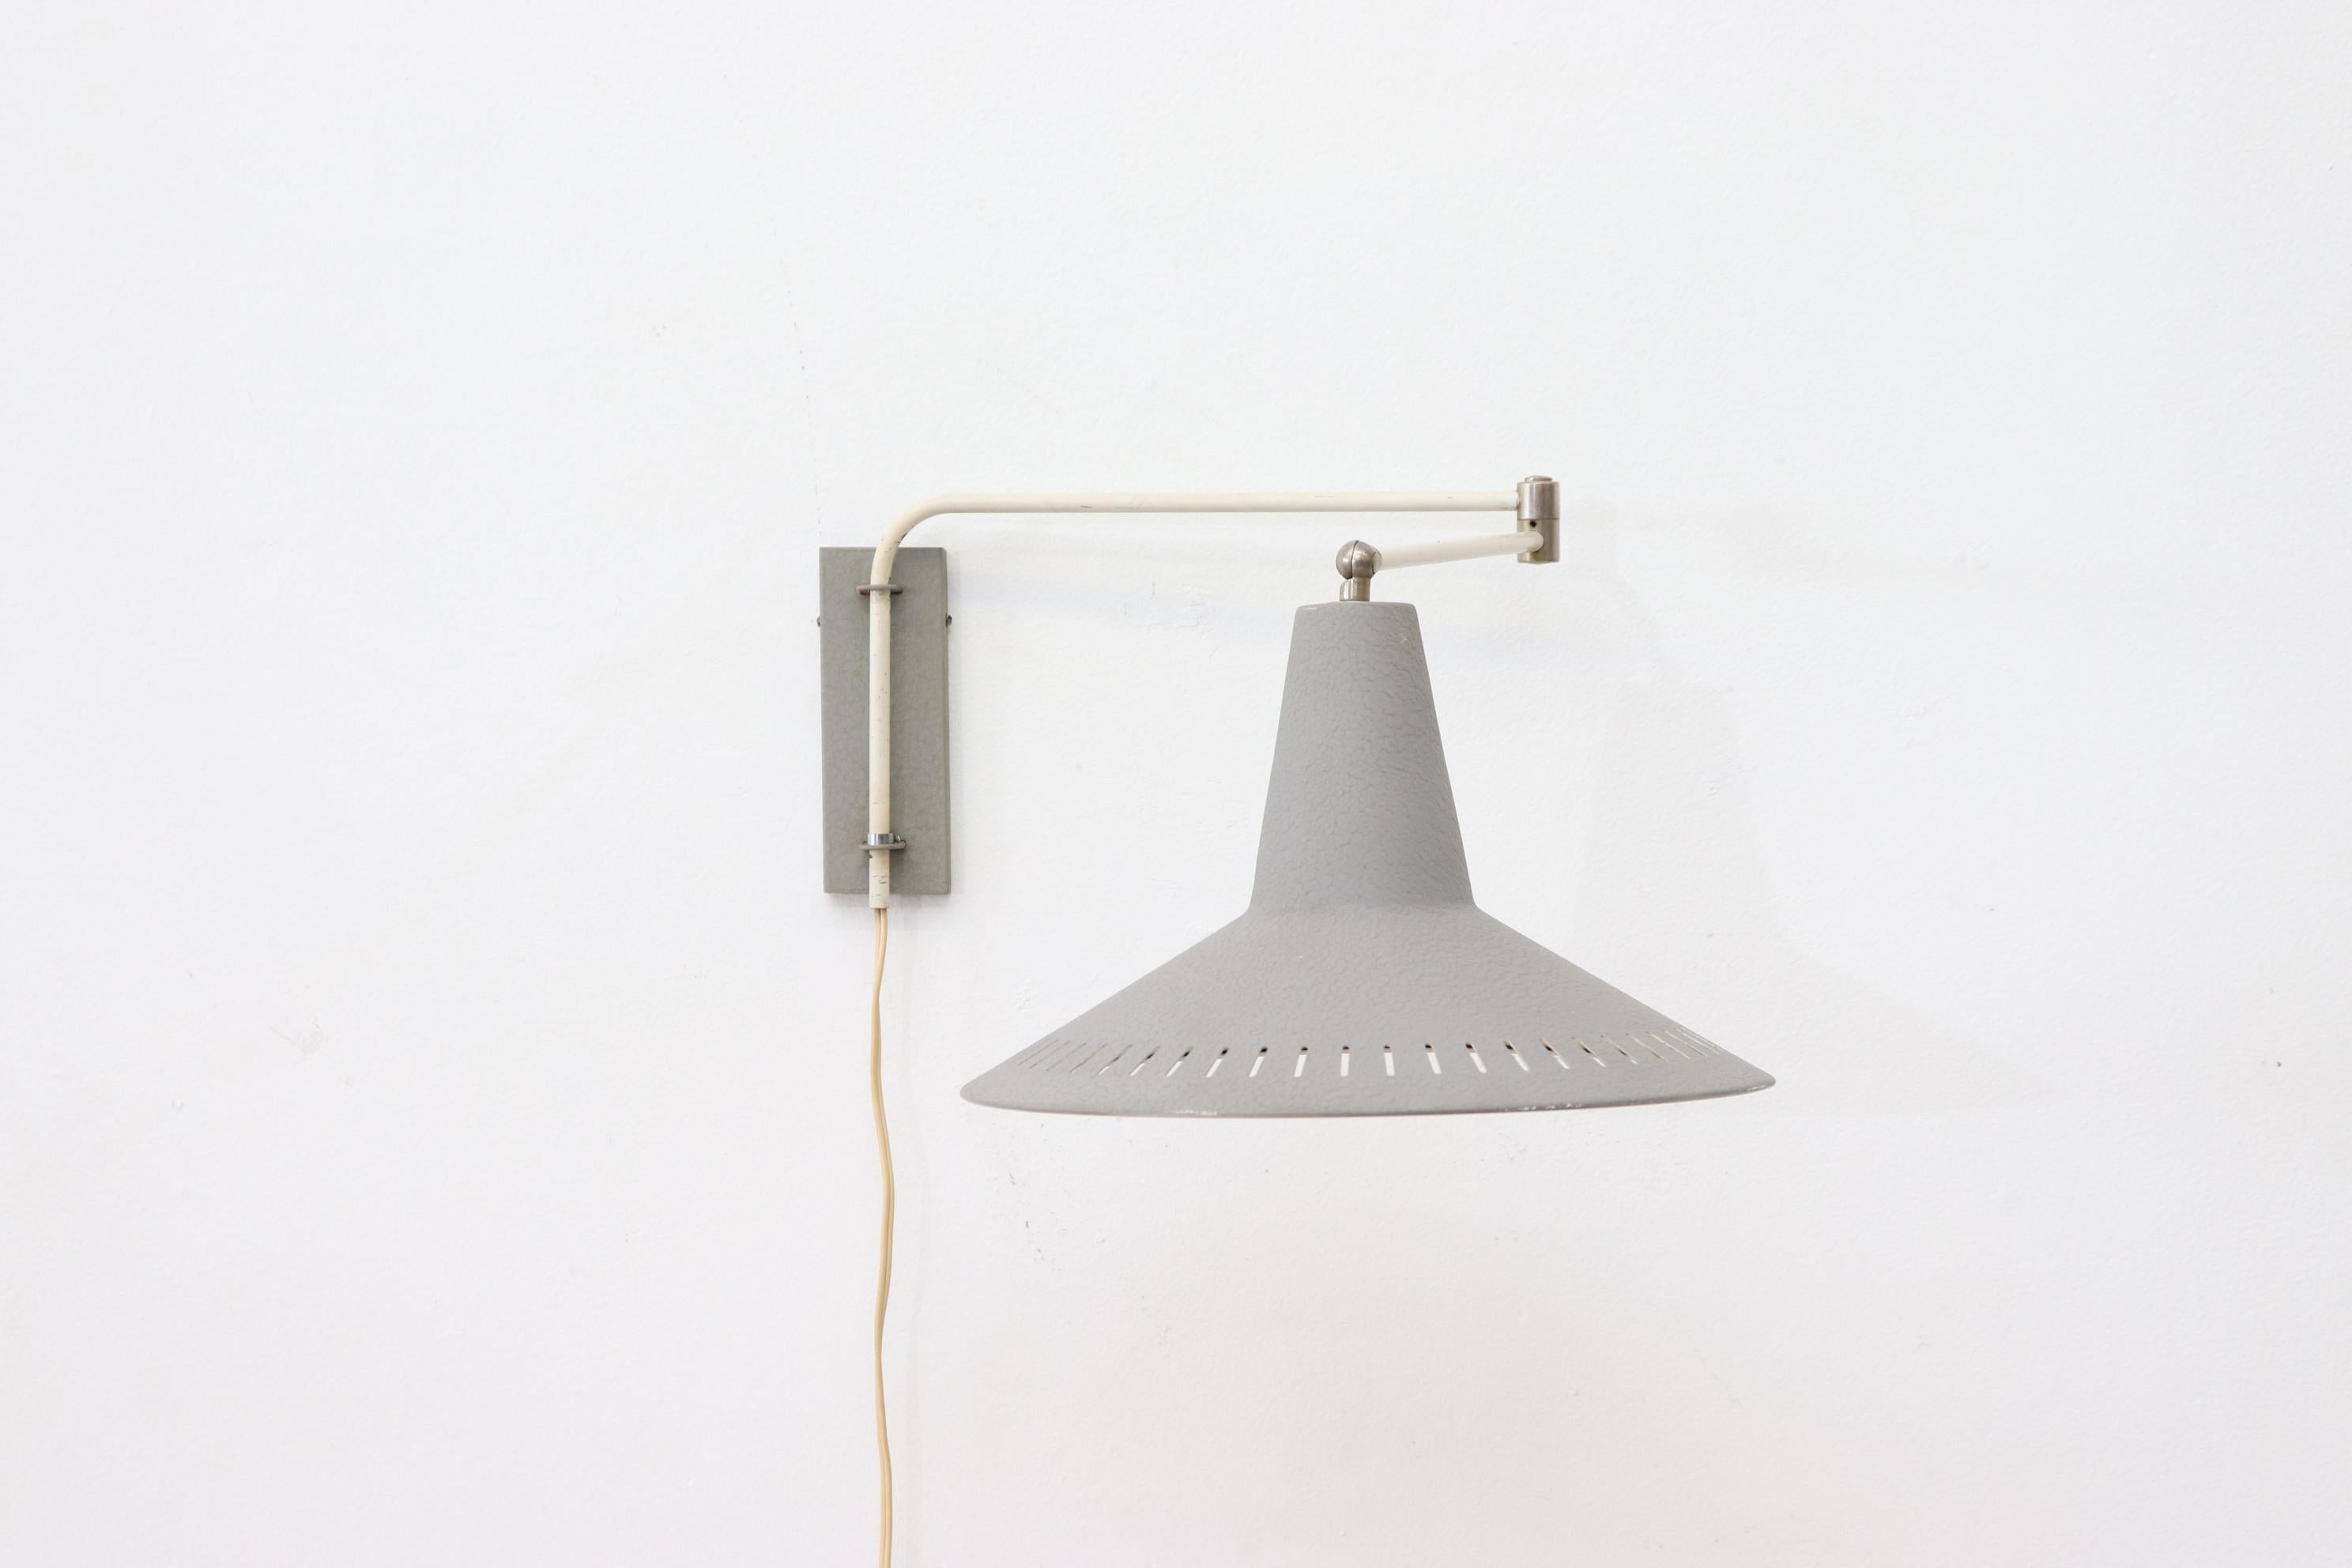 Rietveld style industrial wall mount lamp with grey textured metal shade and matching wall mount on an articulating arm. In original condition with wear consistent with age. Similar Sconces available (LU922415503082) and listed separately.